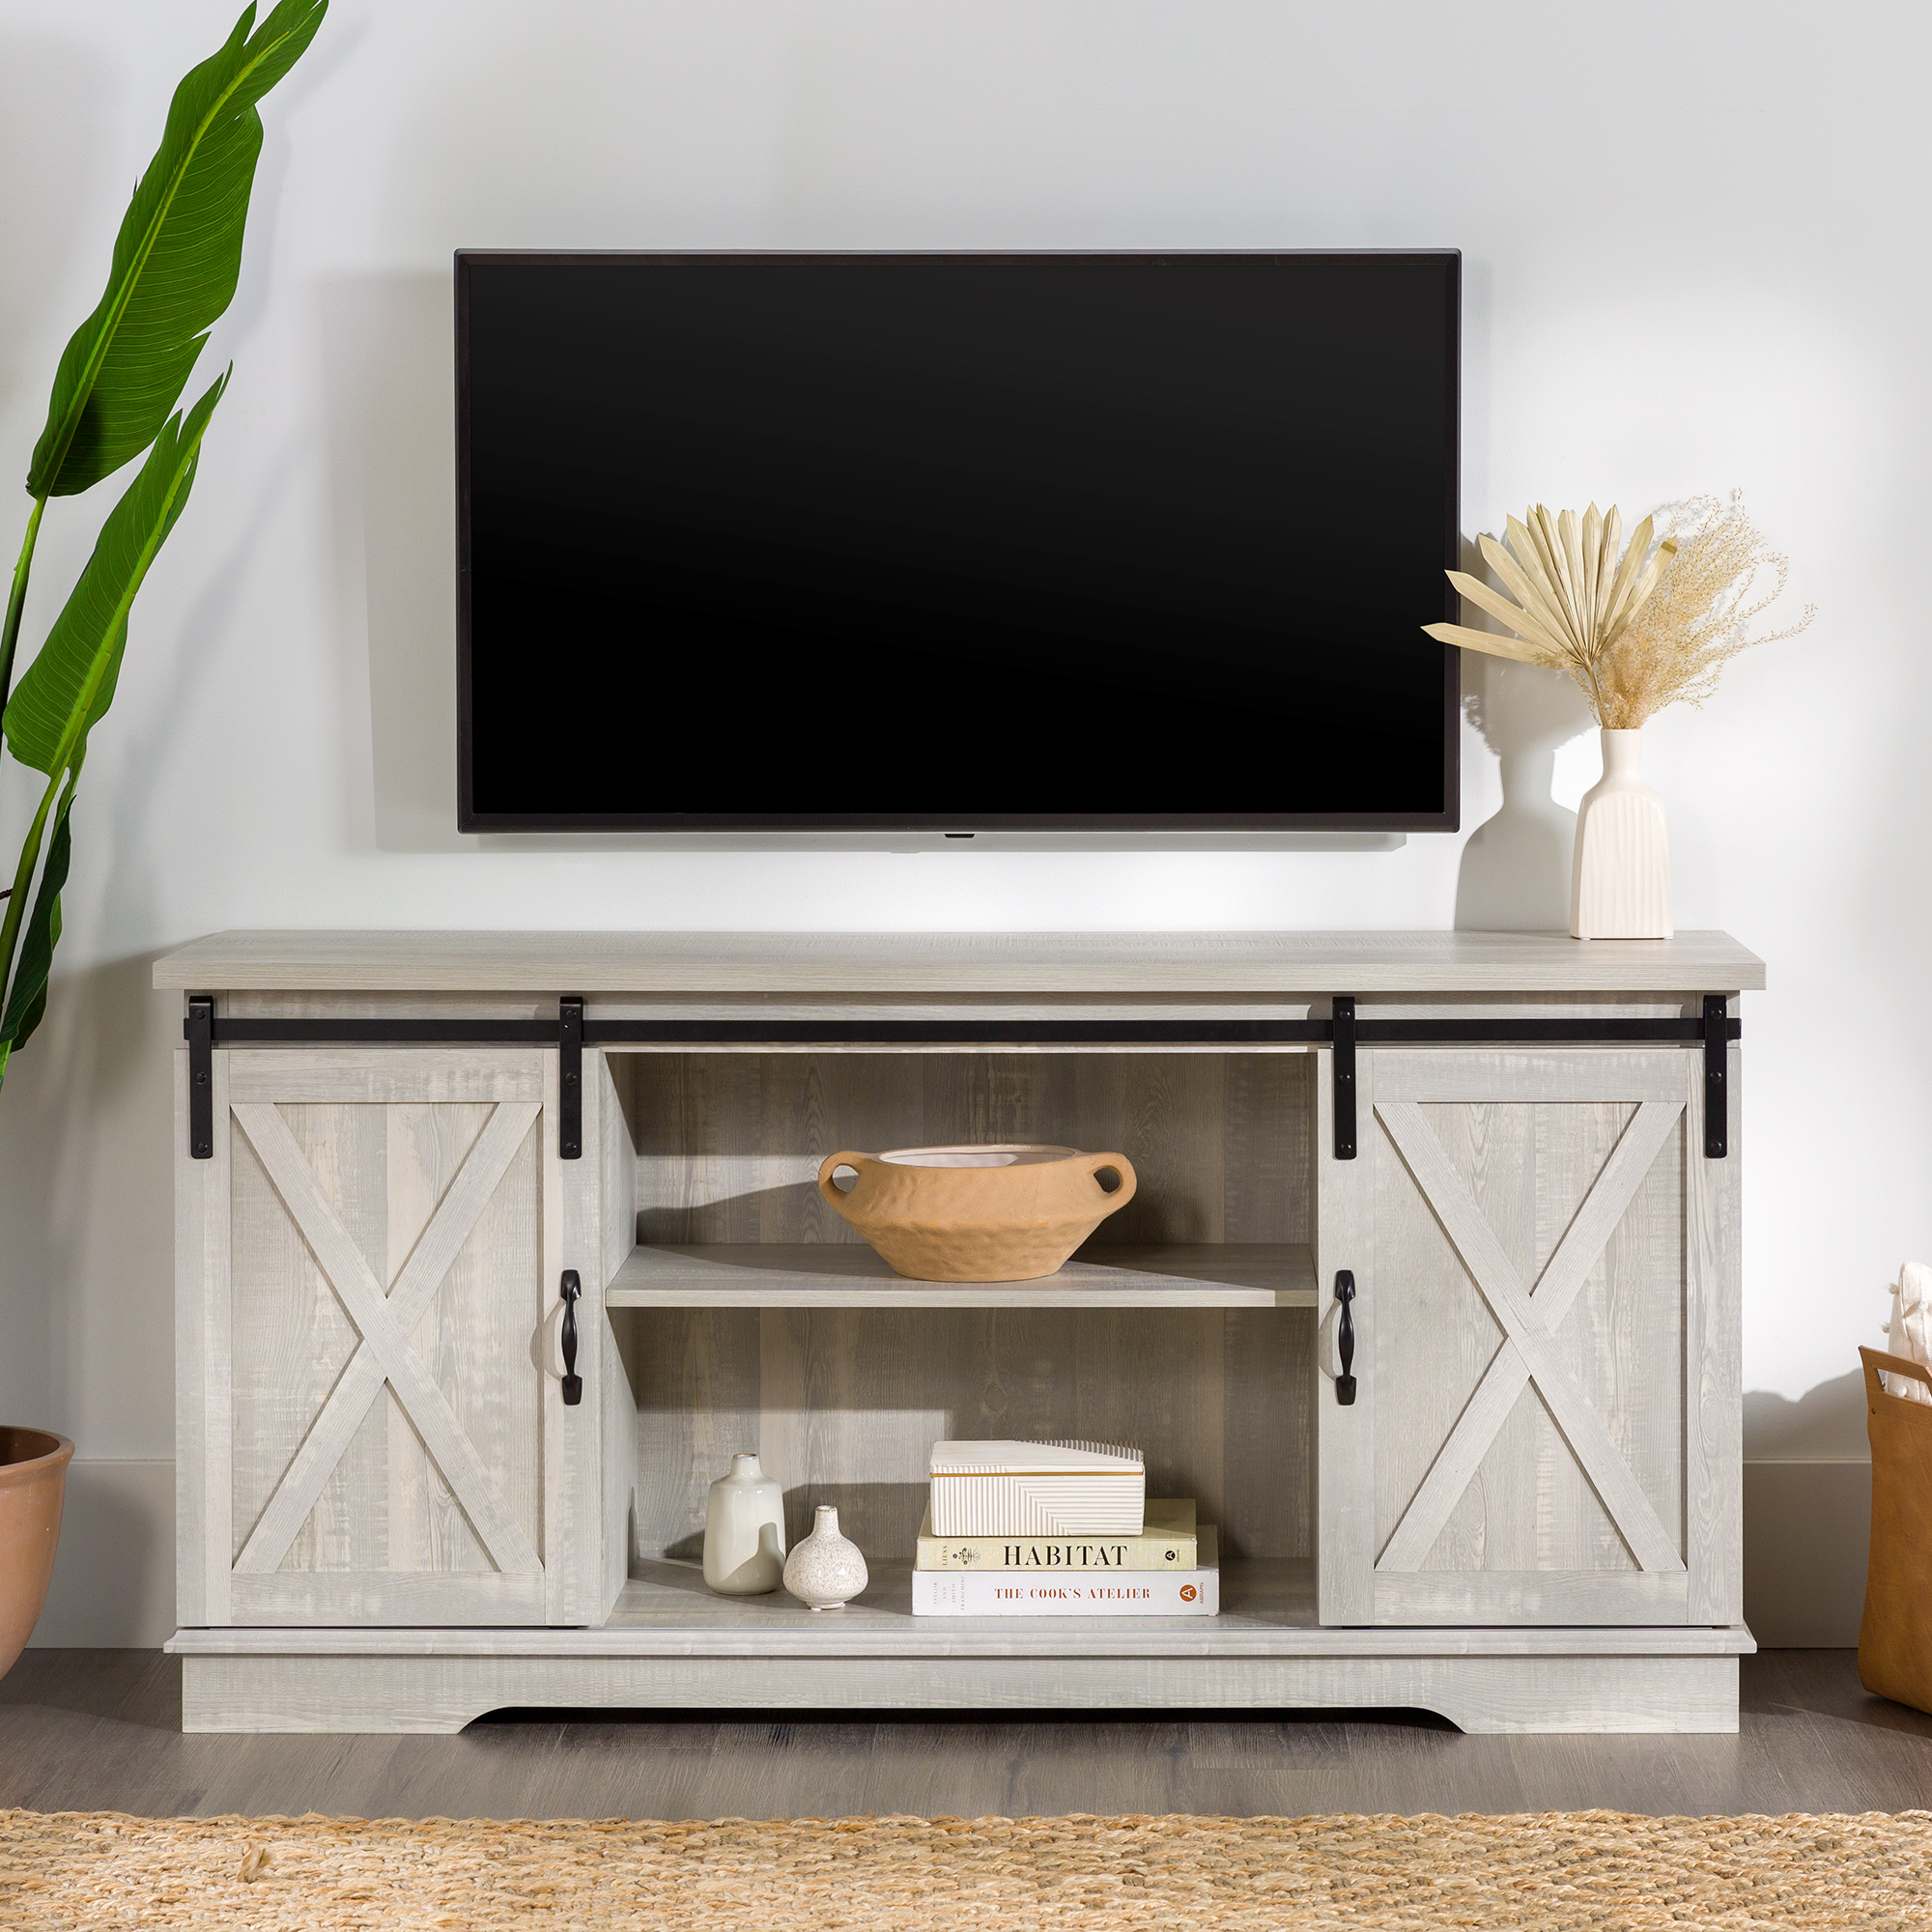 Woven Paths Sliding Farmhouse Barn Door TV Stand for TVs up to 65", Stone Grey - image 1 of 16